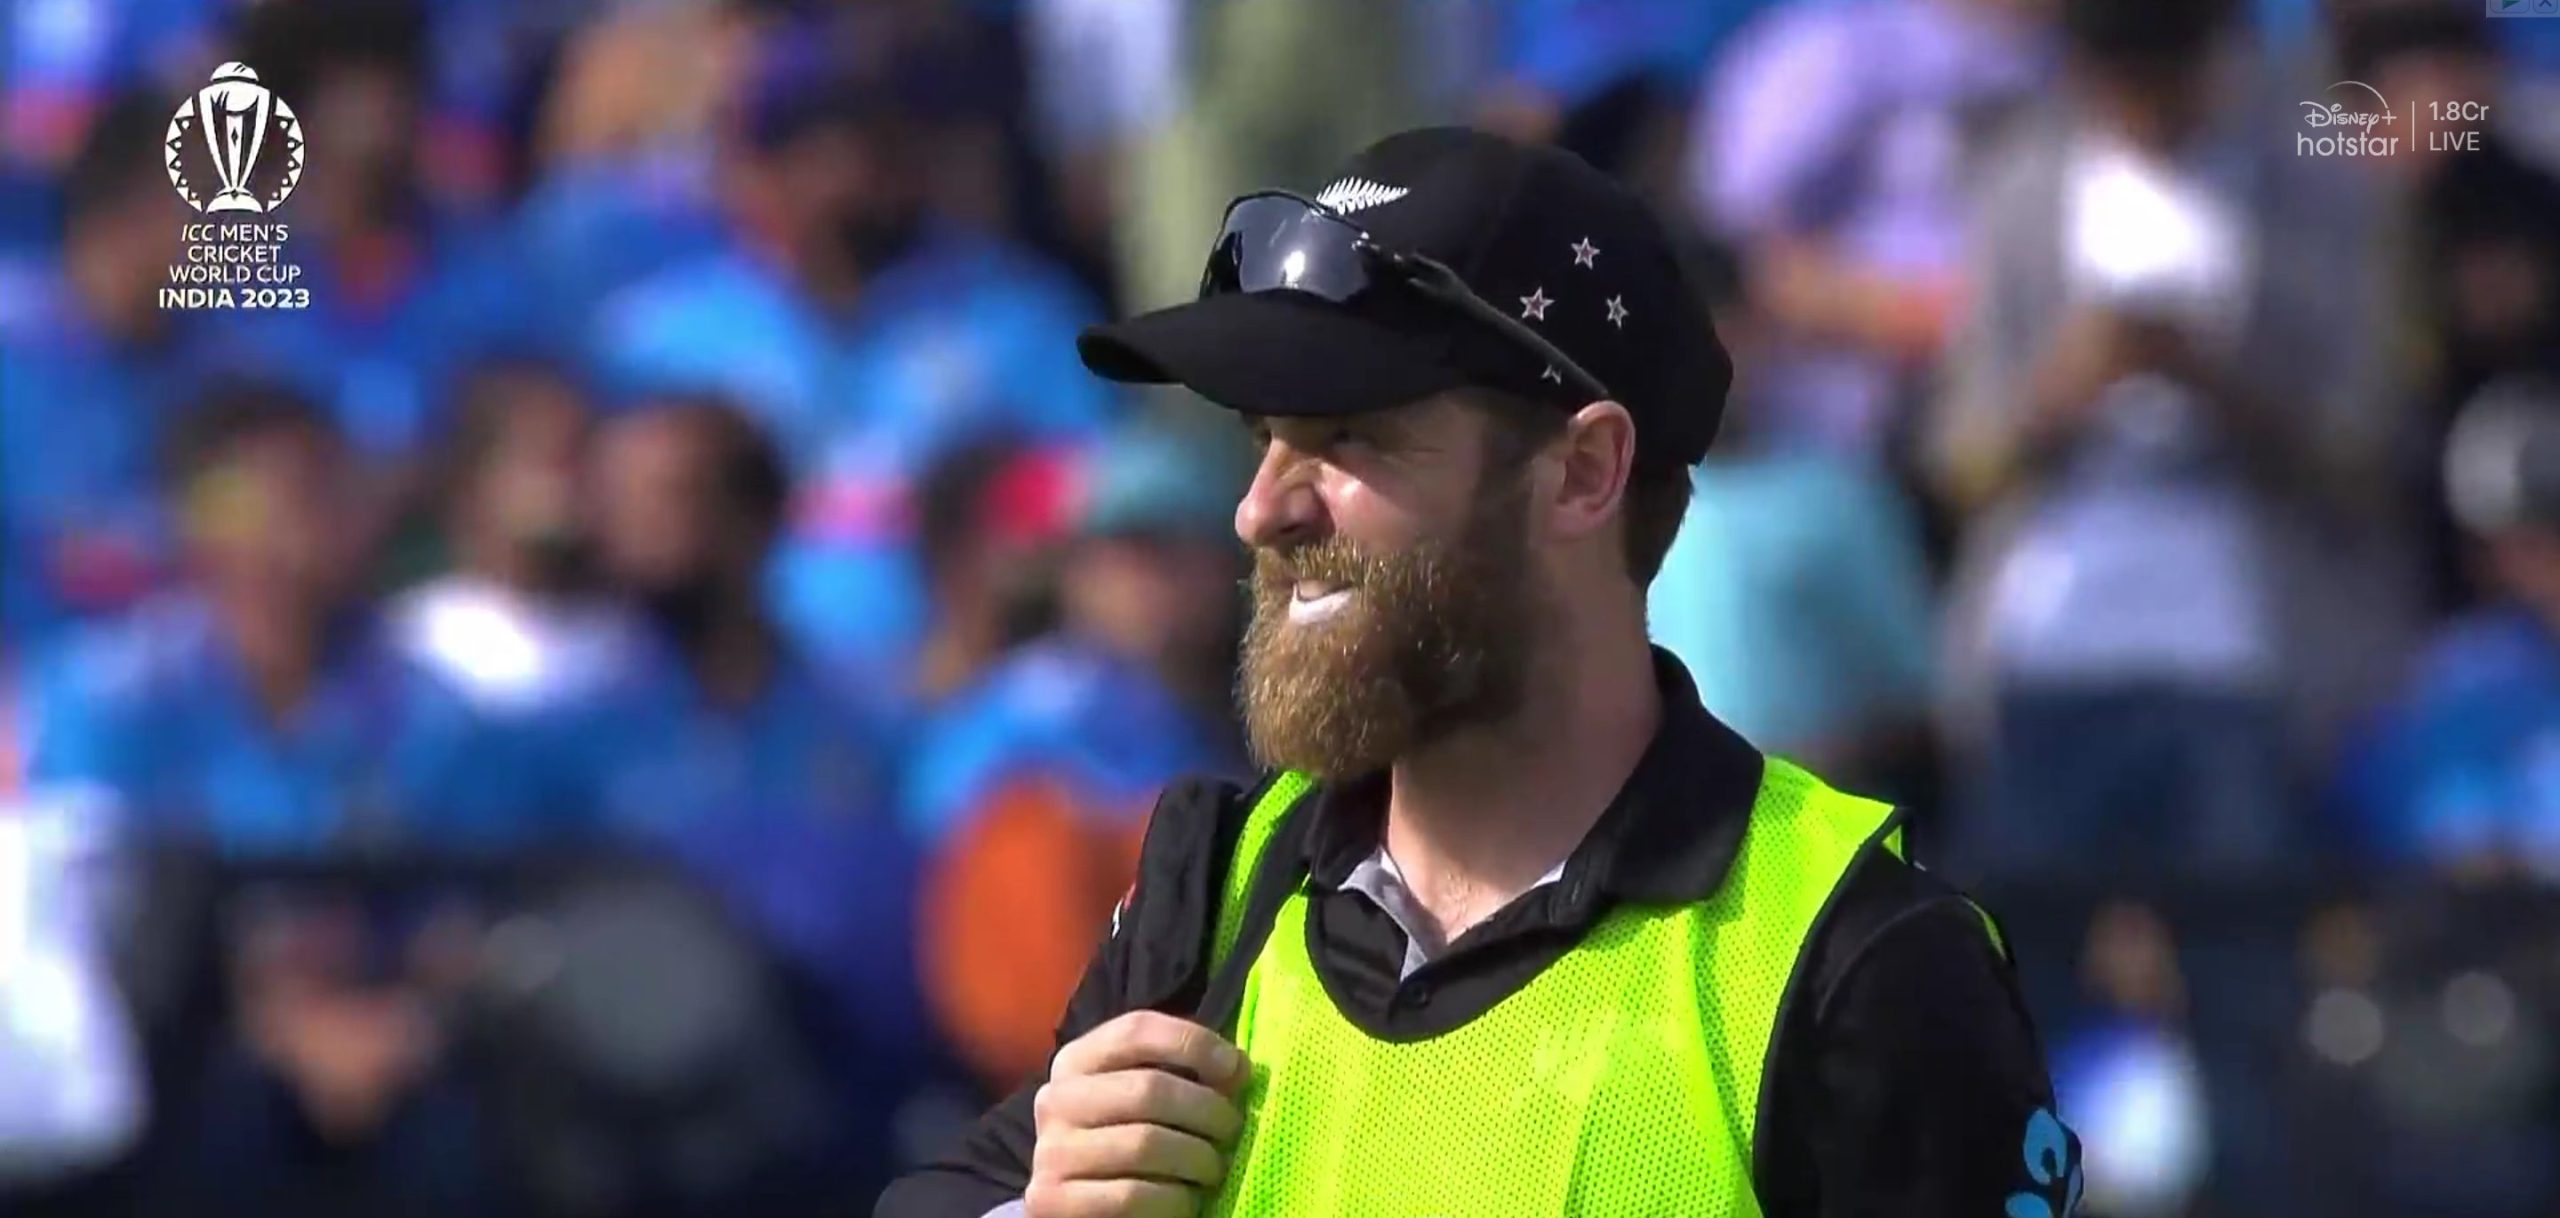 ICC Cricket World Cup 2023: [WATCH] Kane Williamson Becomes Waterboy In IND vs NZ Clash